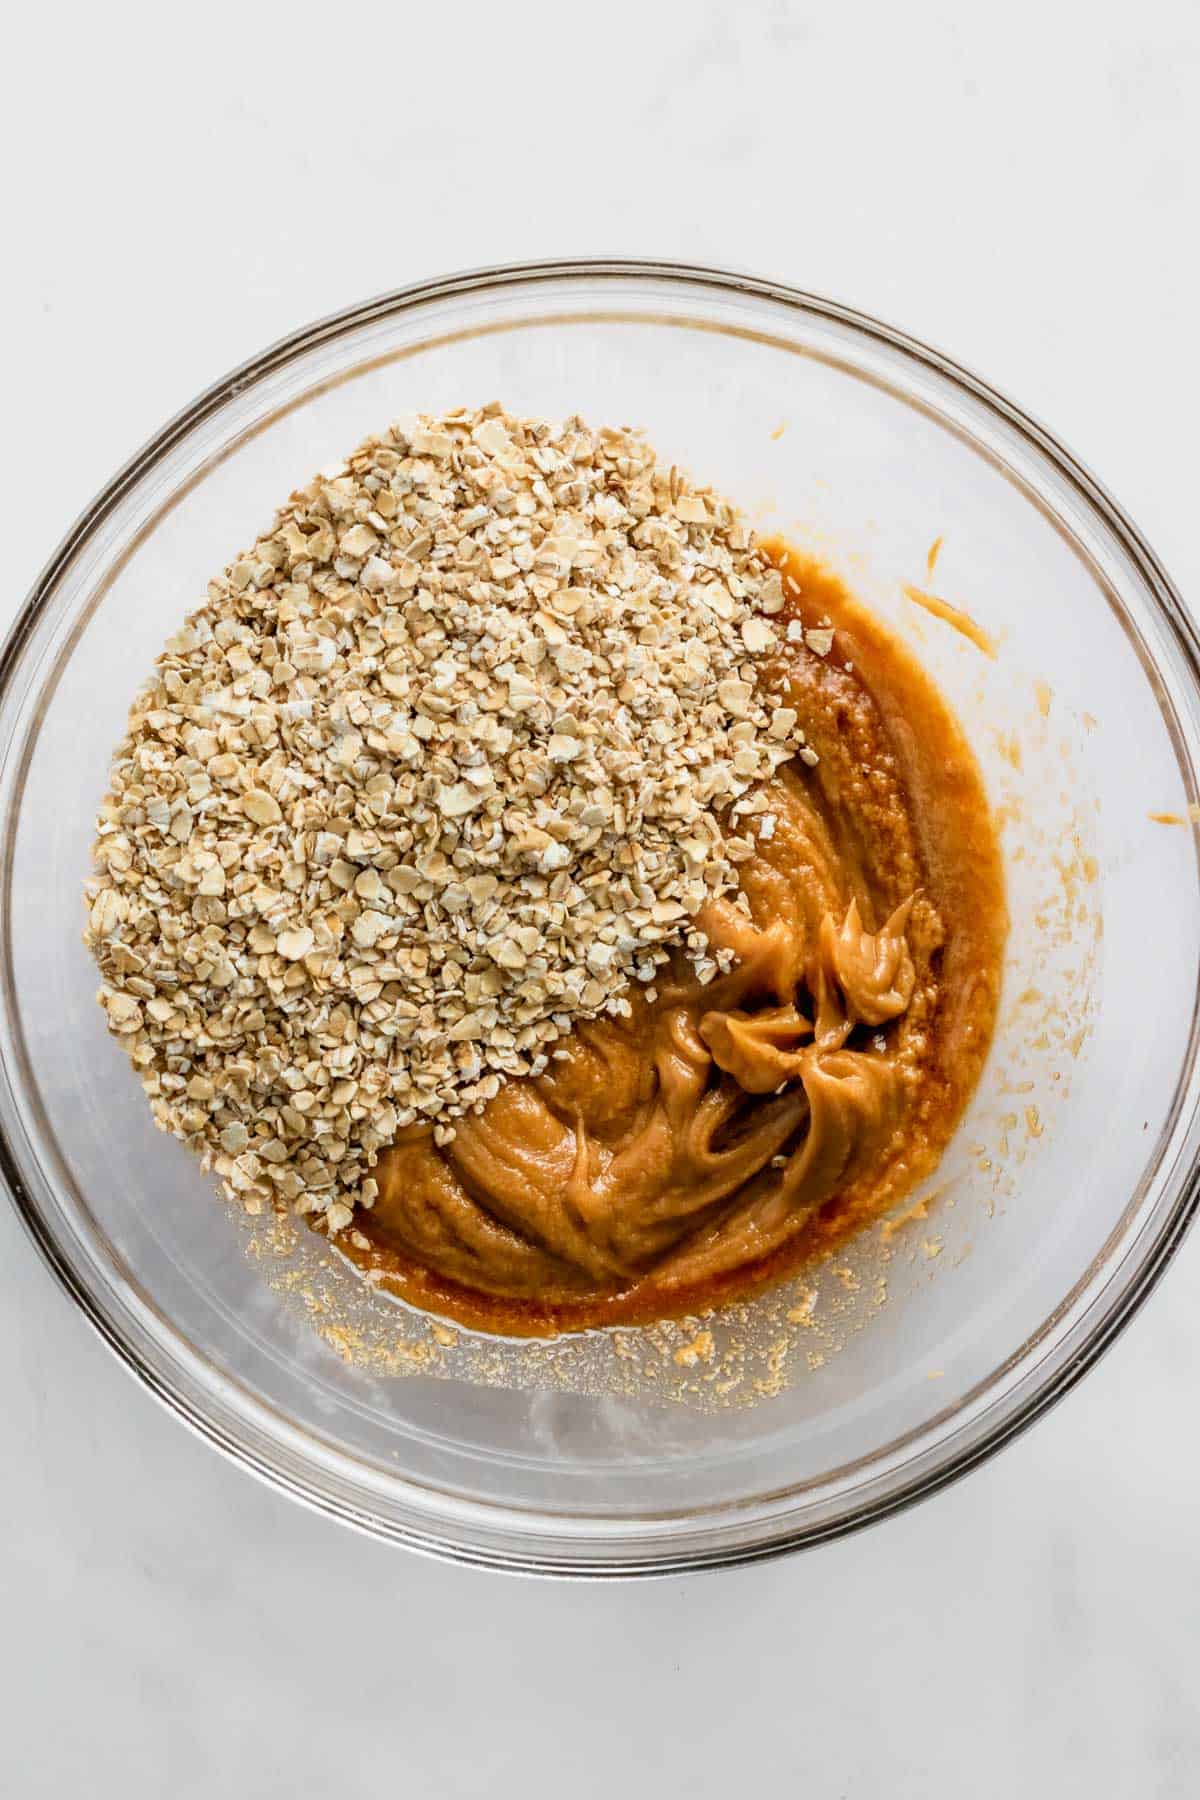 oats and peanut butter mixed together in a bowl